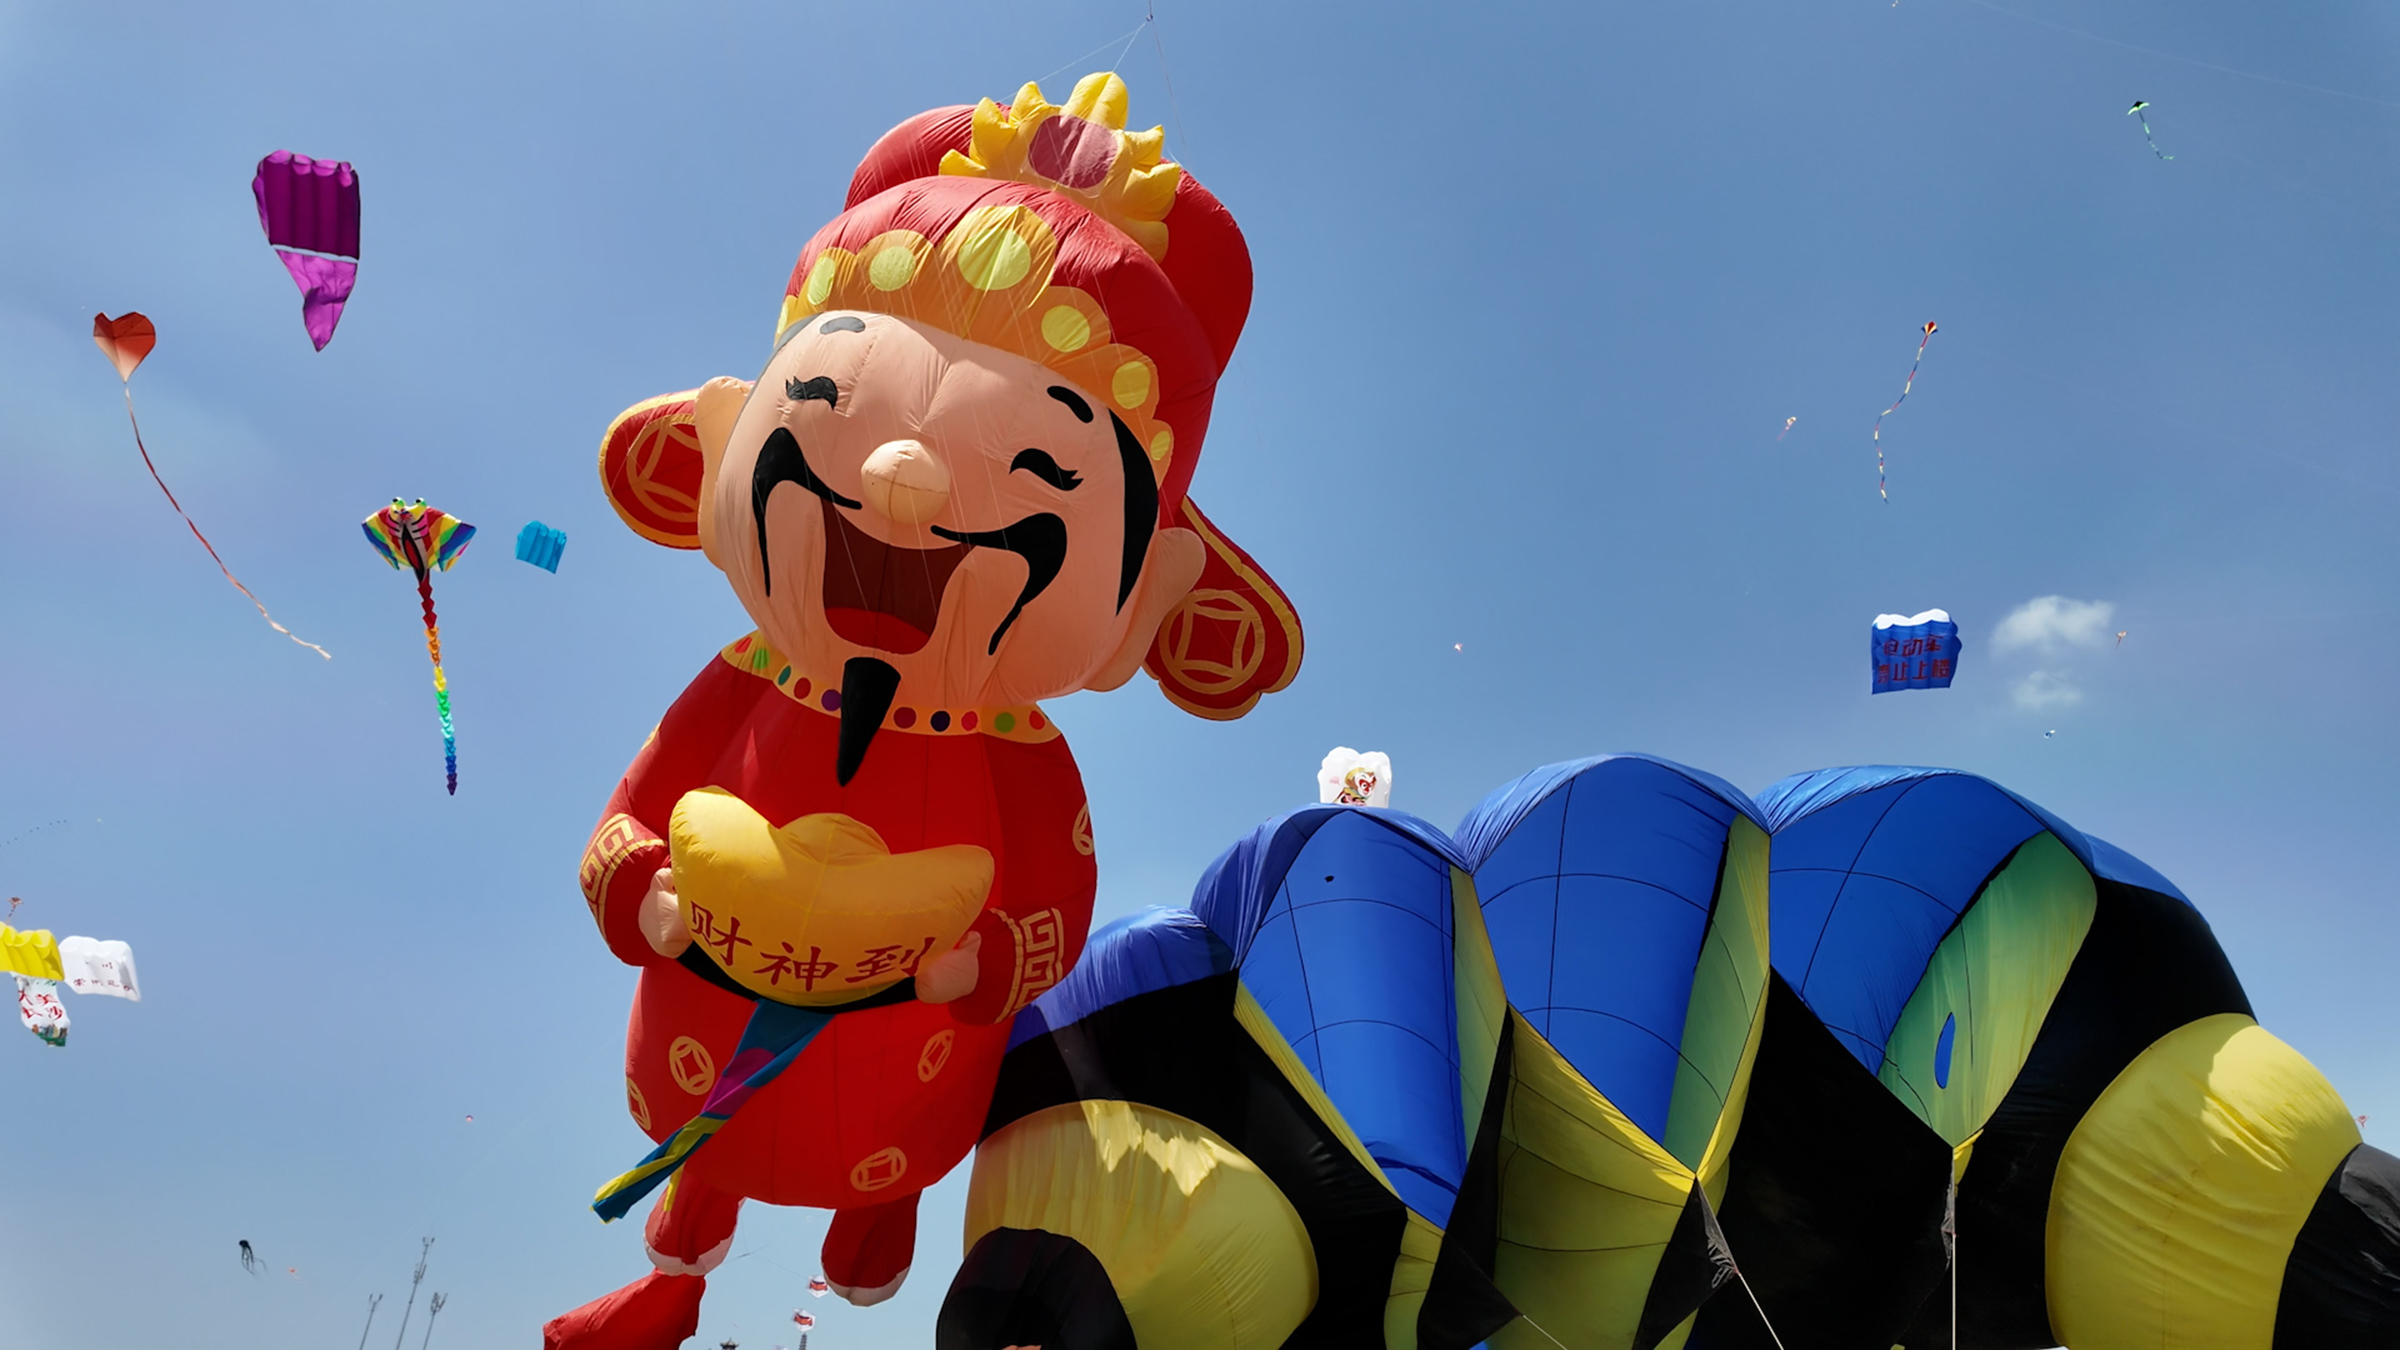 Weifang City: Kites carry message of Sino-French friendship